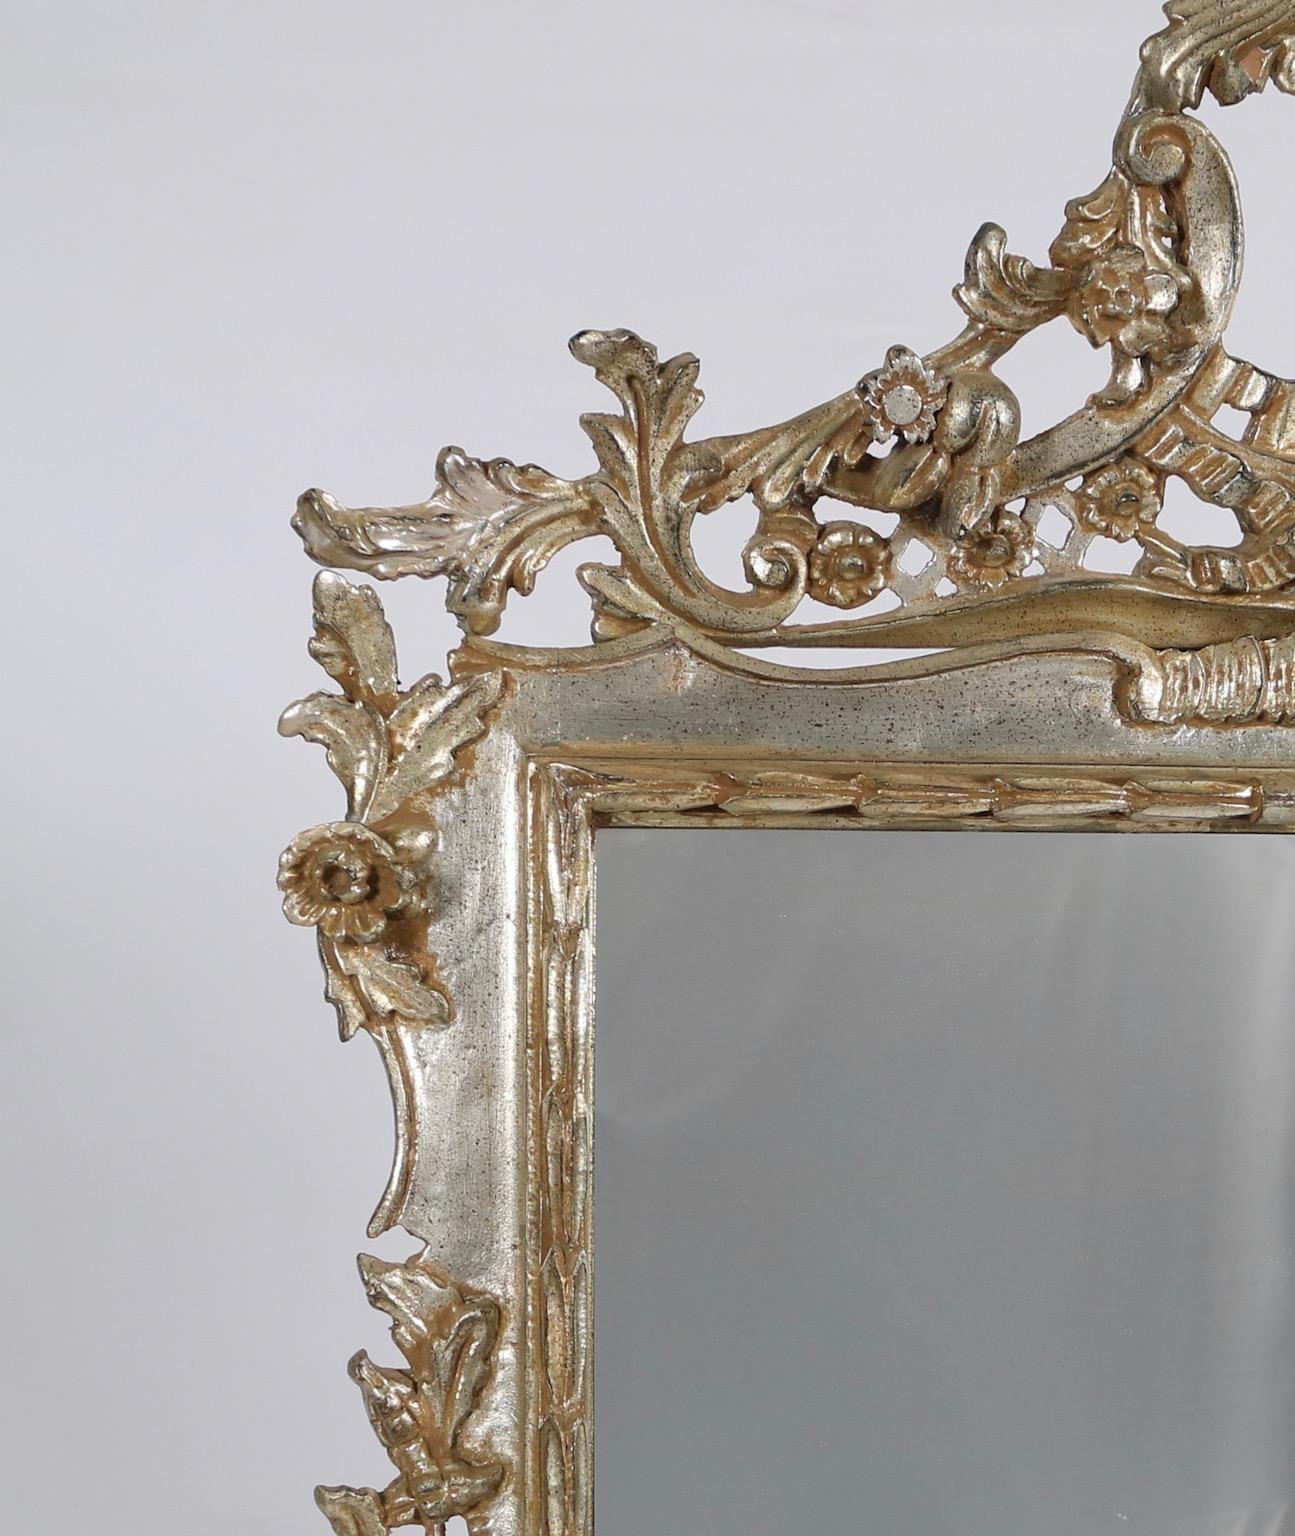 Italian Hollywood Regency mirror made of carved wood with silver leaf. The mirror features intricate carved scroll work with flowers and fruits. Wear appropriate to age and use. The mirror remains in excellent vintage condition.